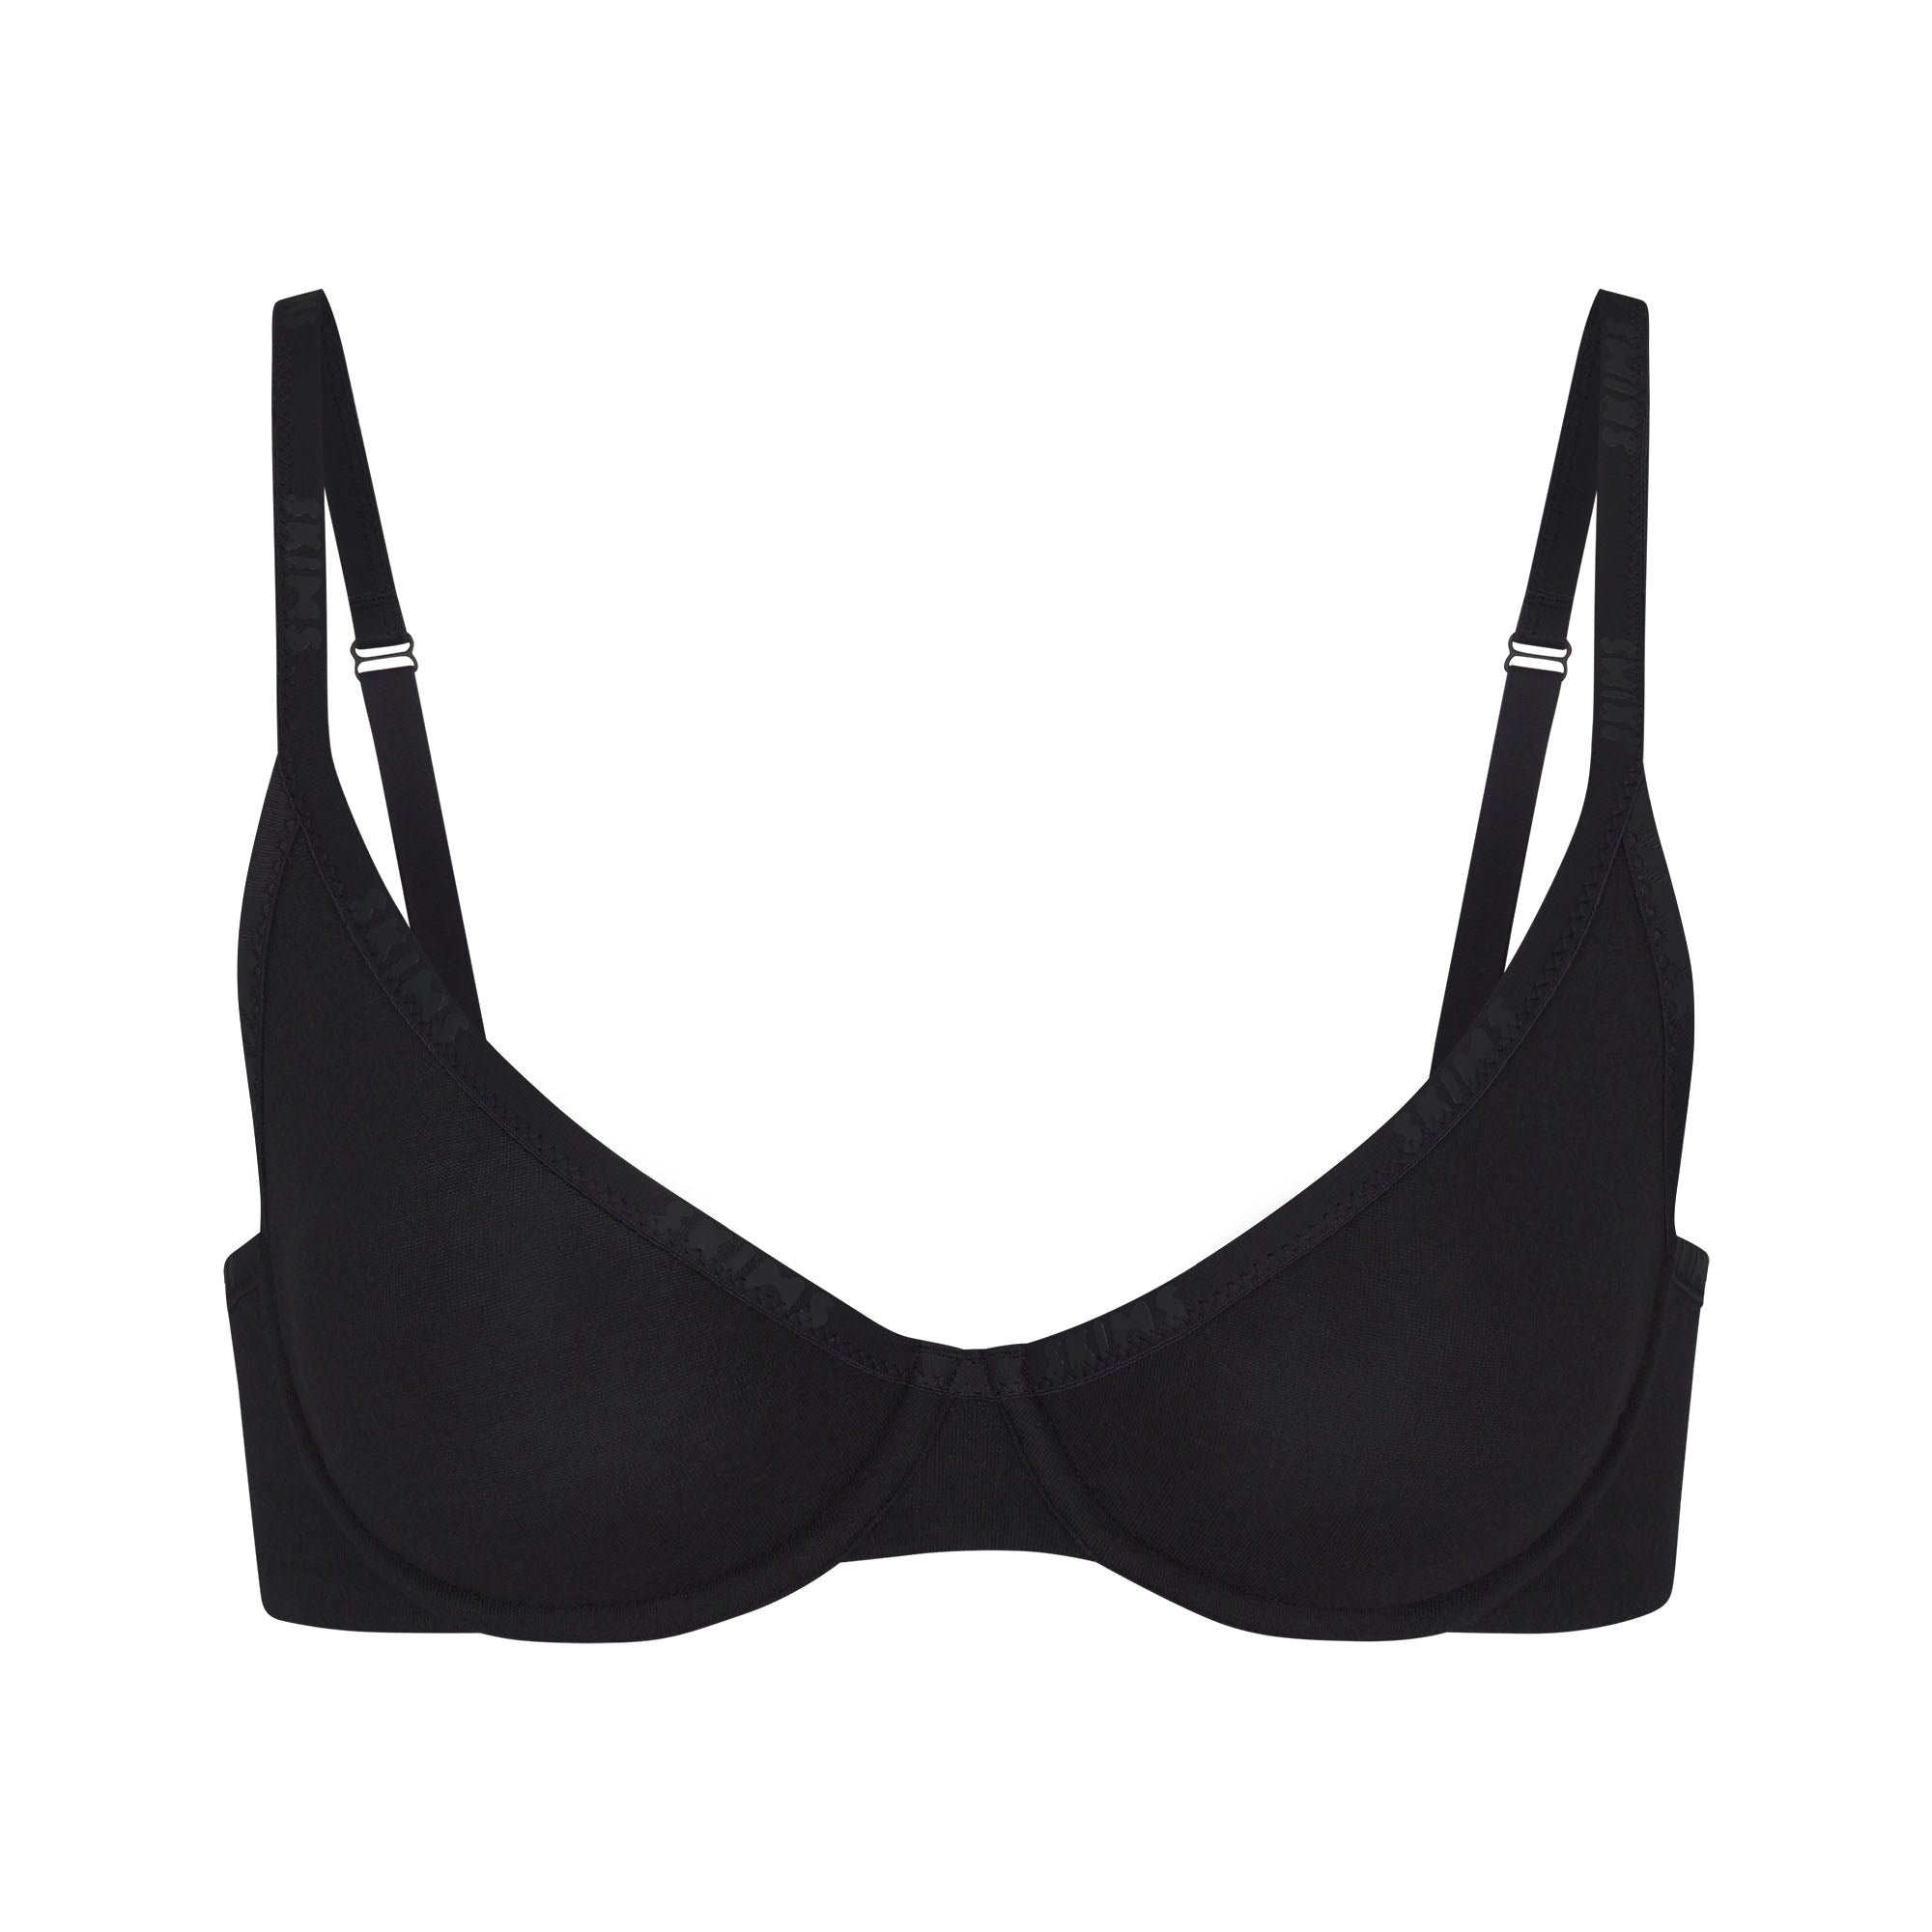 SKIMS New Bra 34B Black Size undefined - $38 New With Tags - From Adrianna